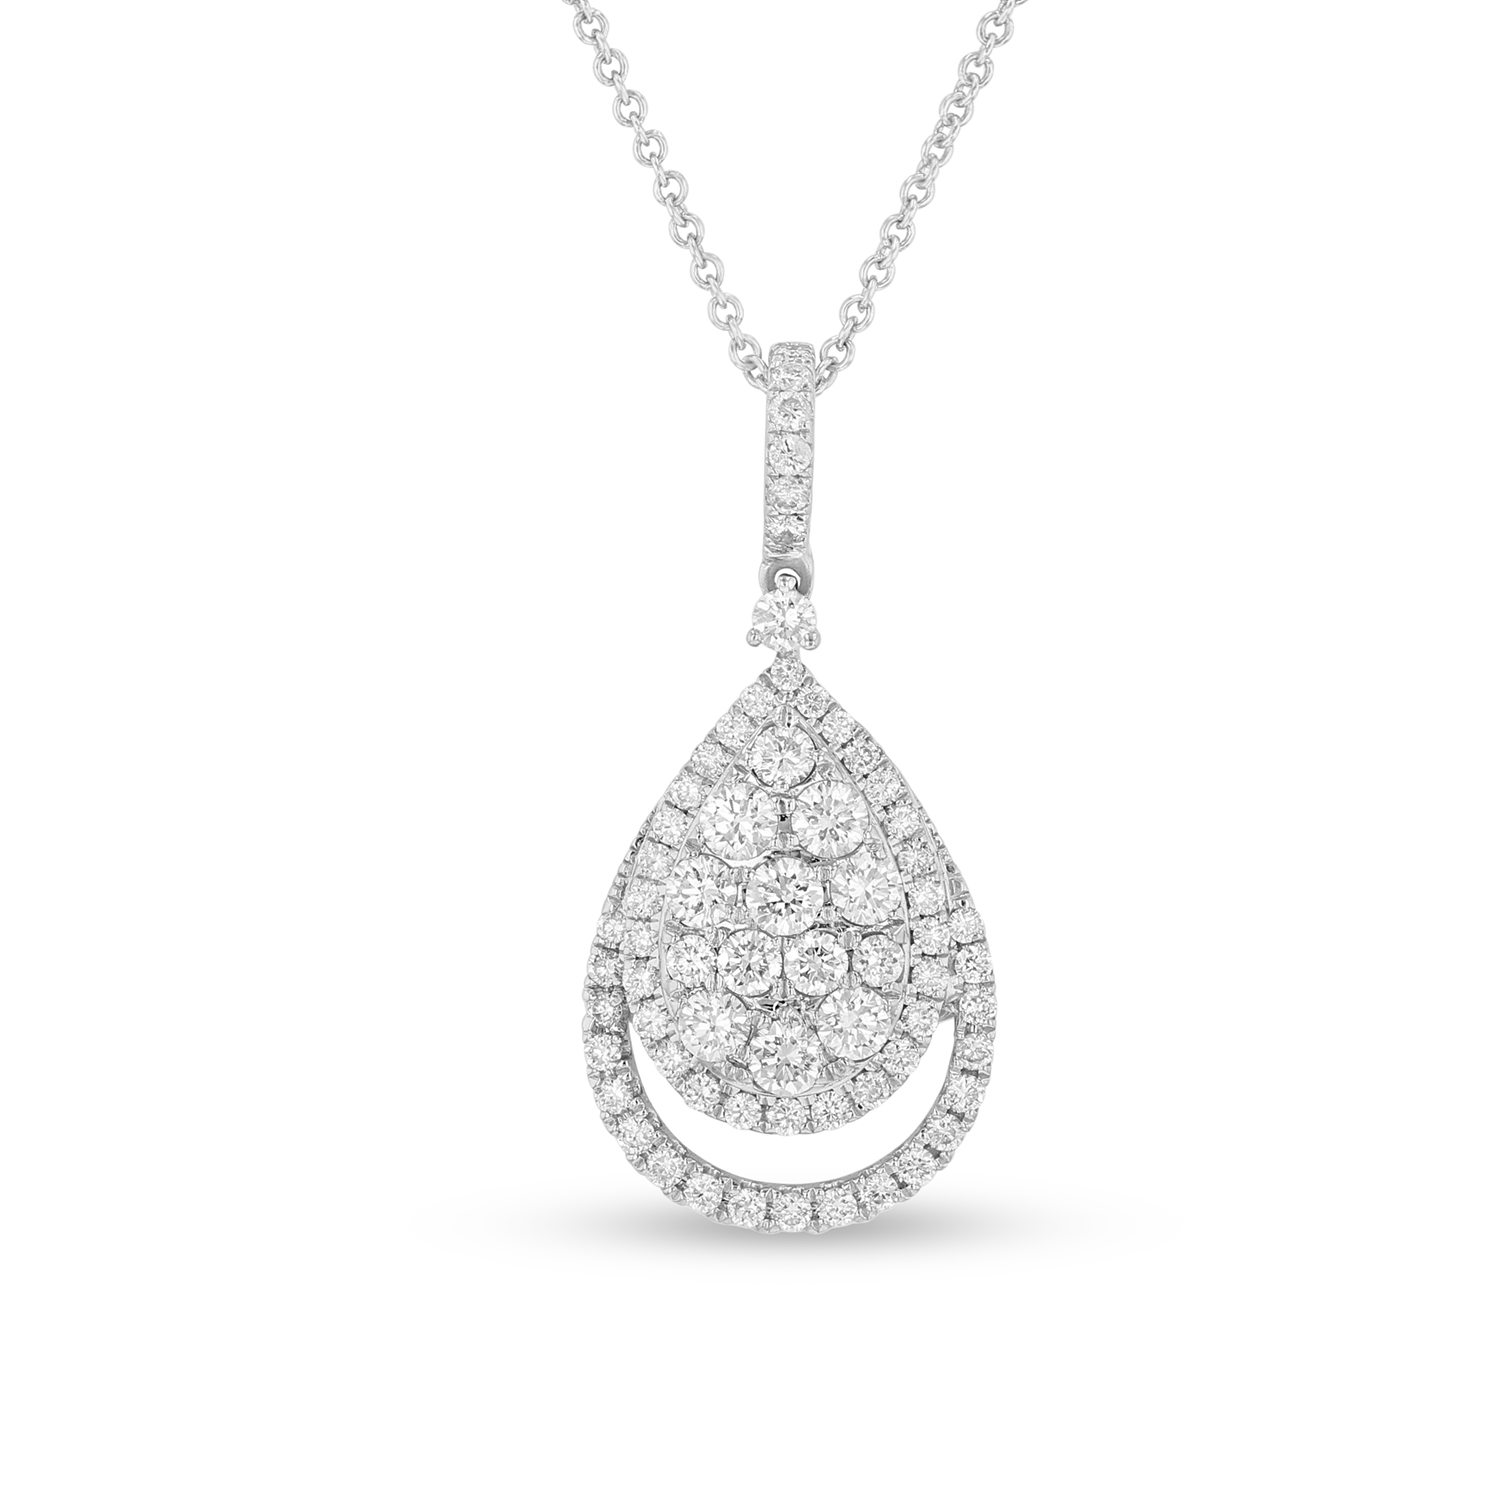 View 0.93ctw Diamond Pear Shaped Cluster Pendant in 18k White Gold